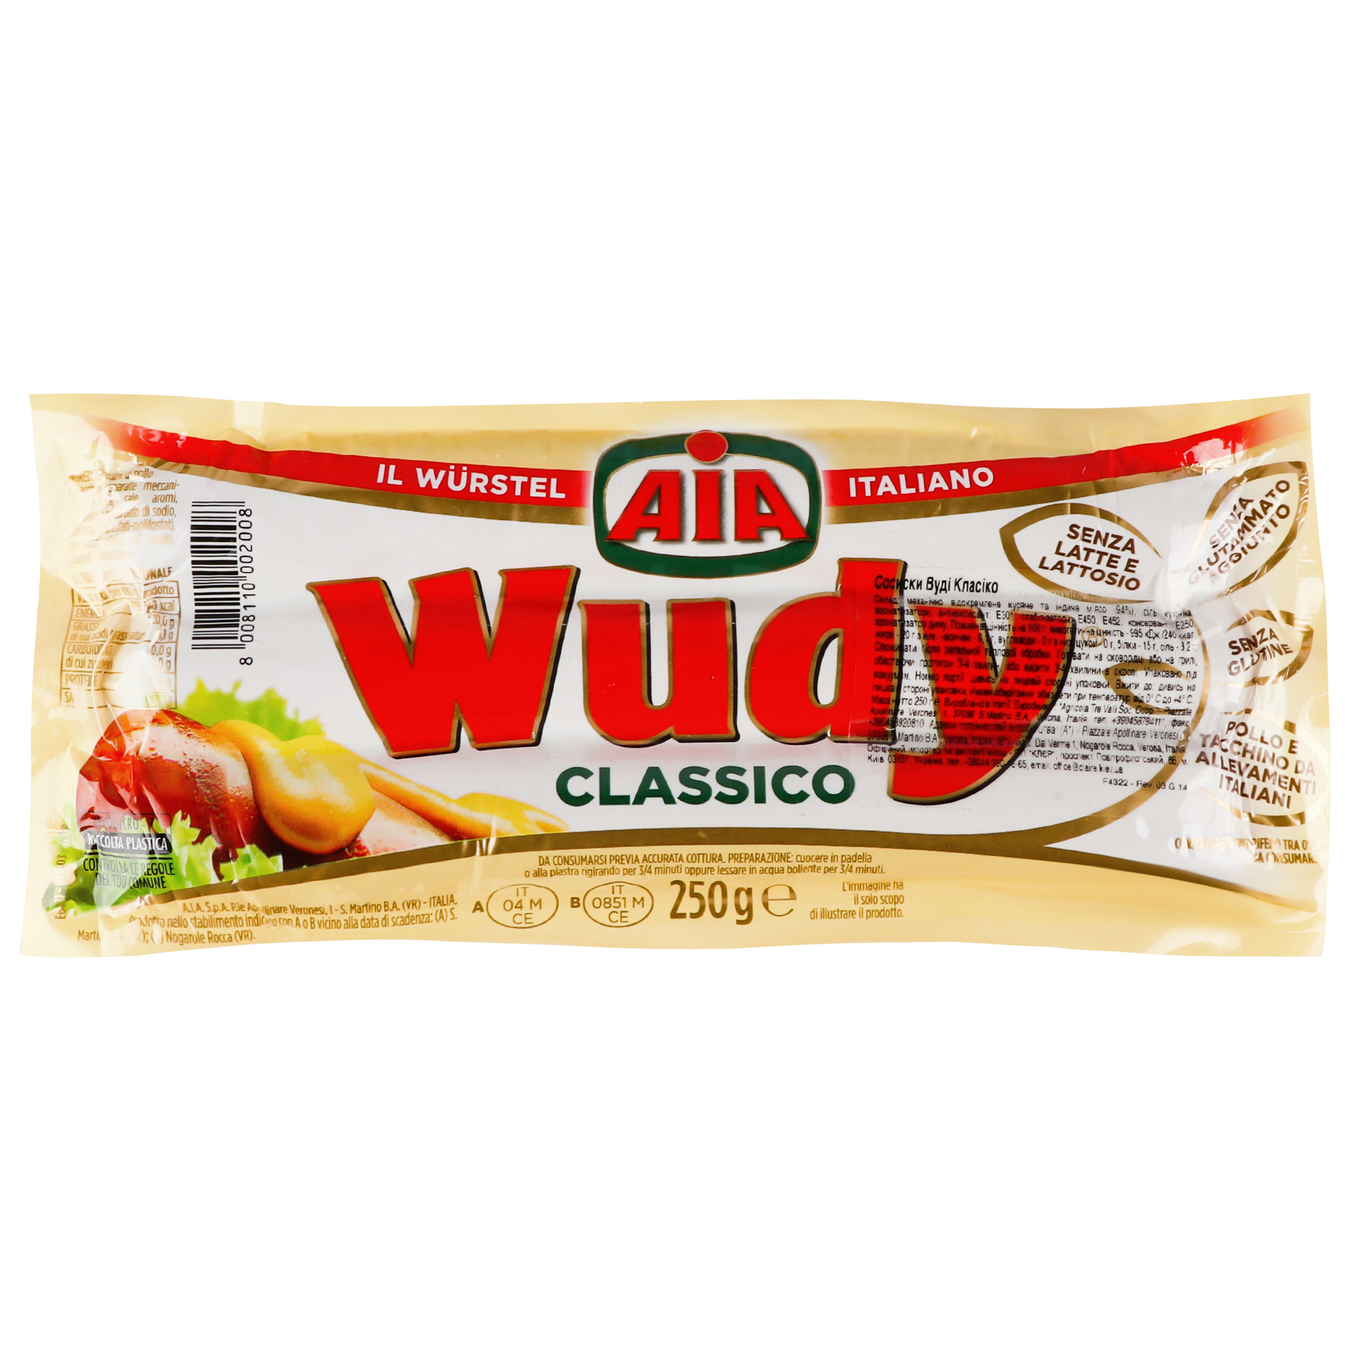 AIA Wudy Classico Sausages 250g